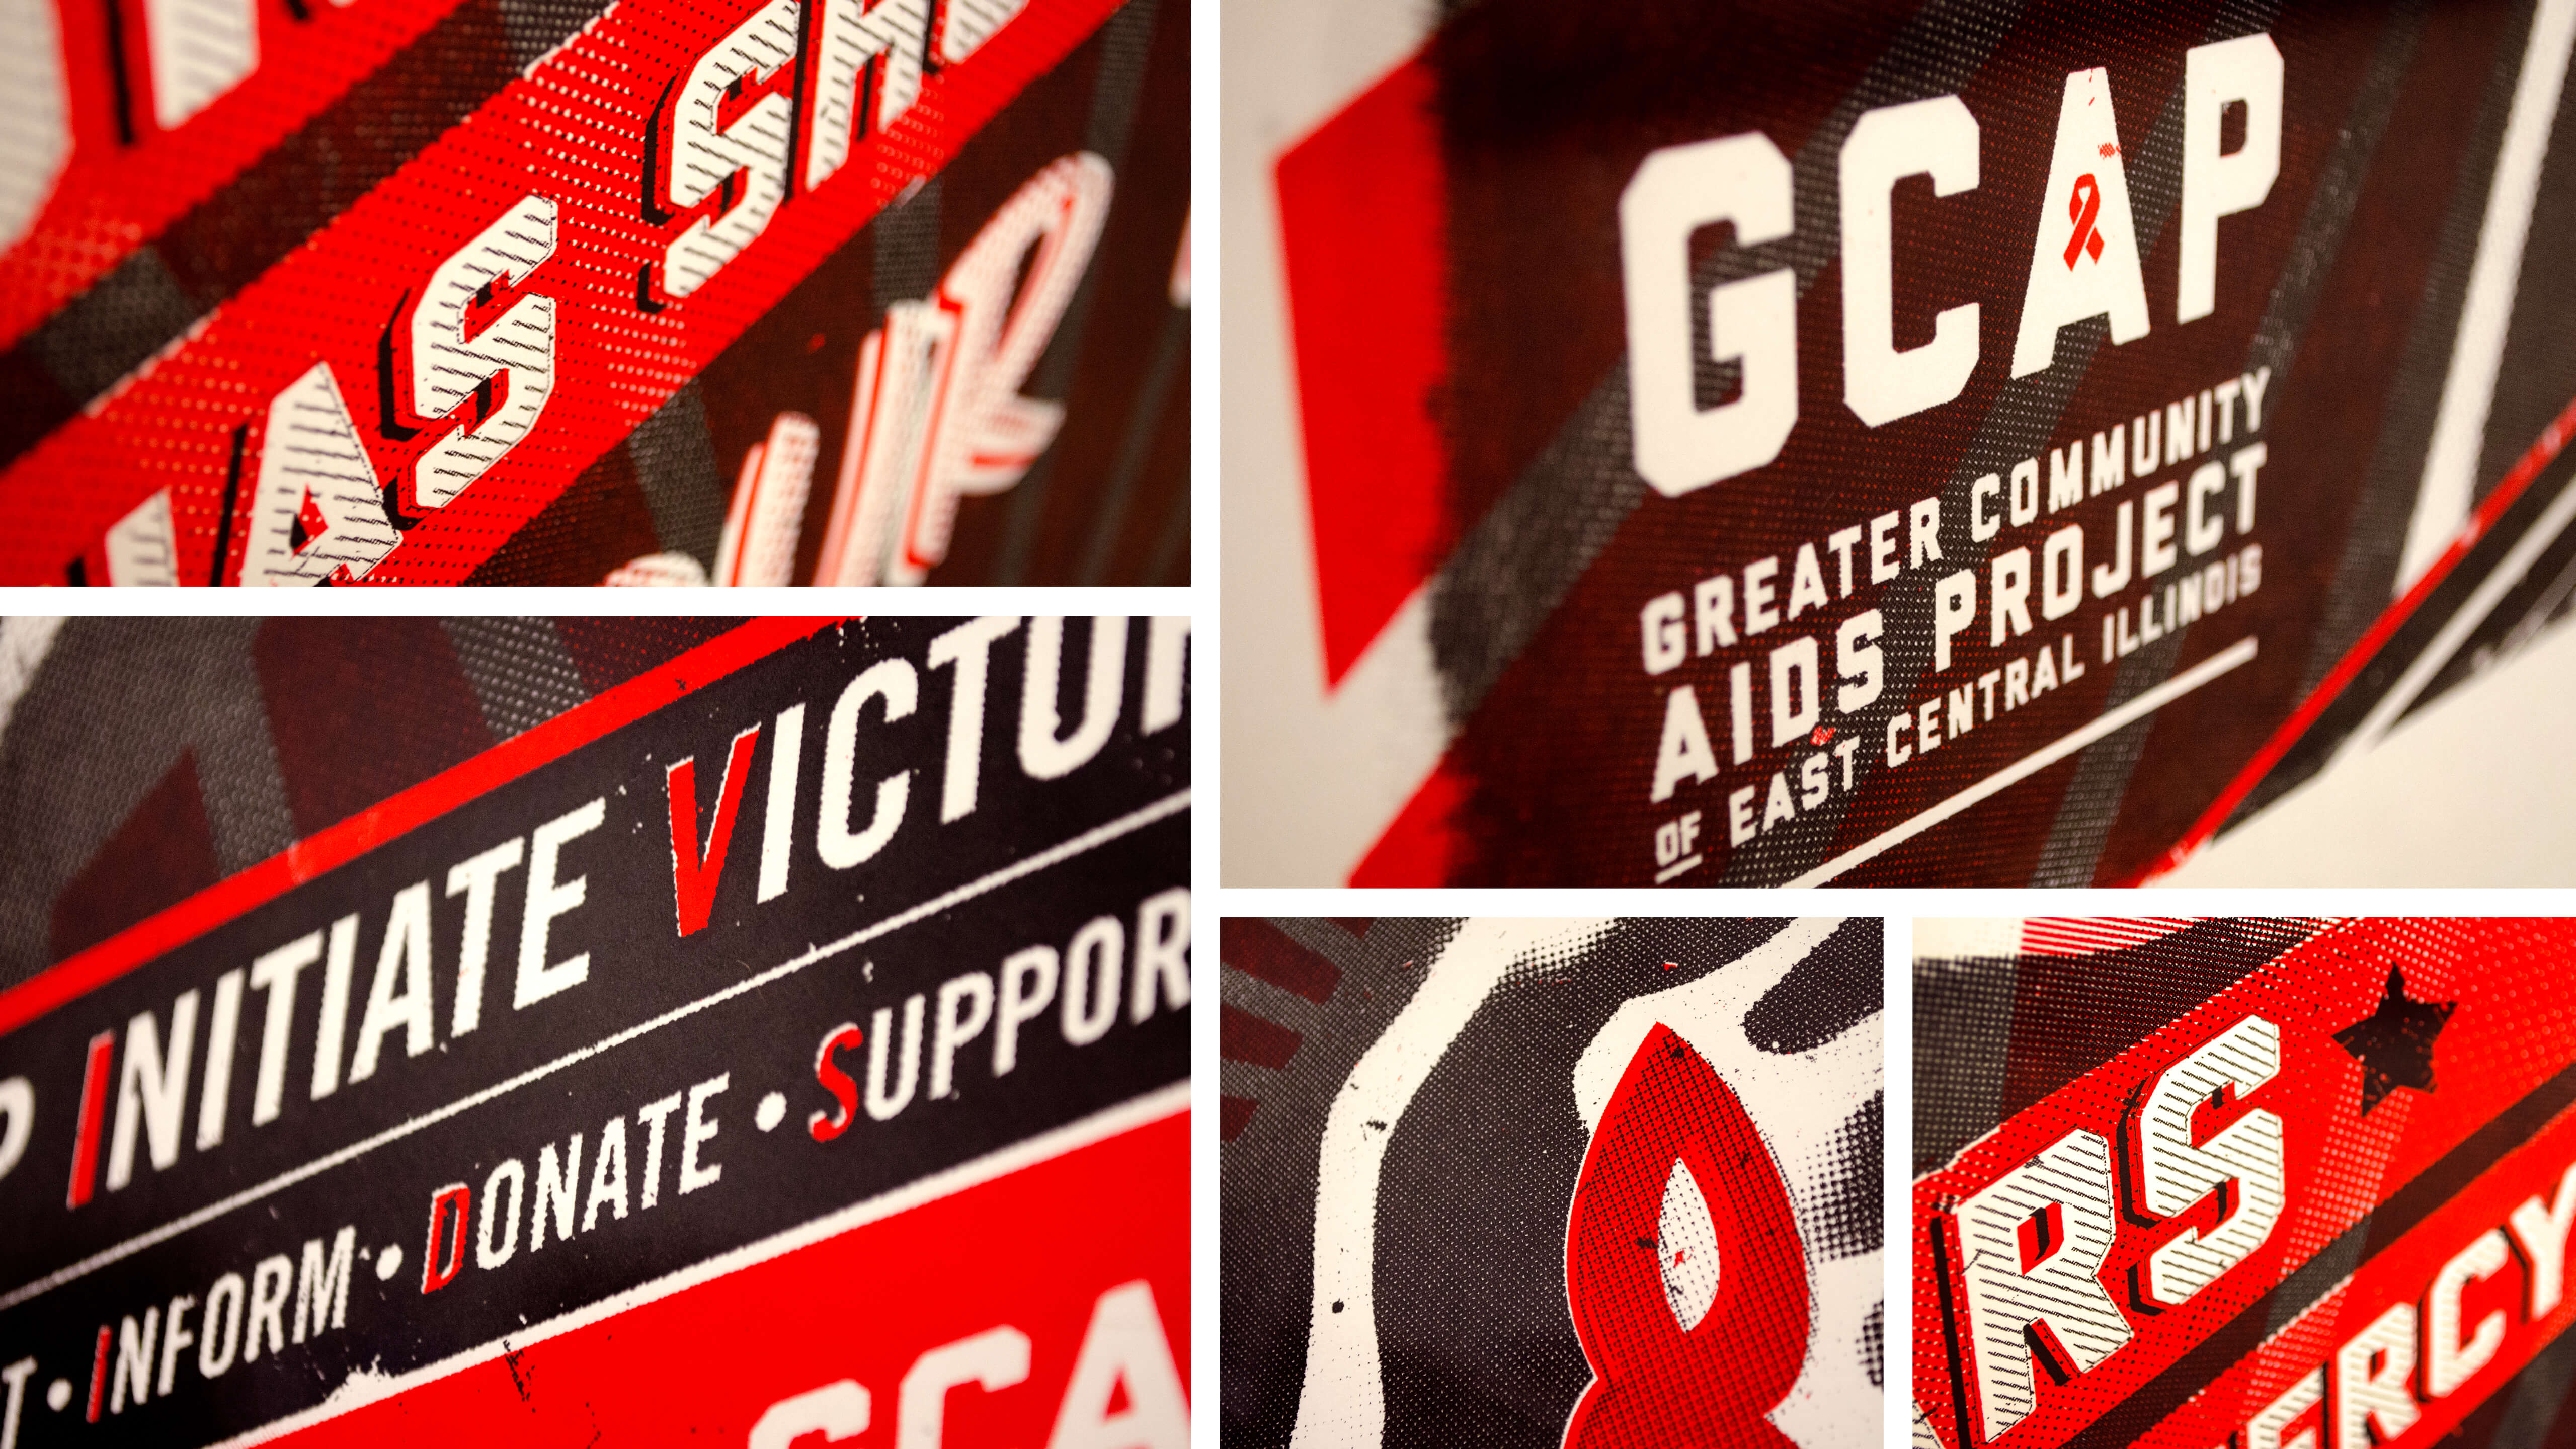 Greater Community Aids Project - Awareness Campaign